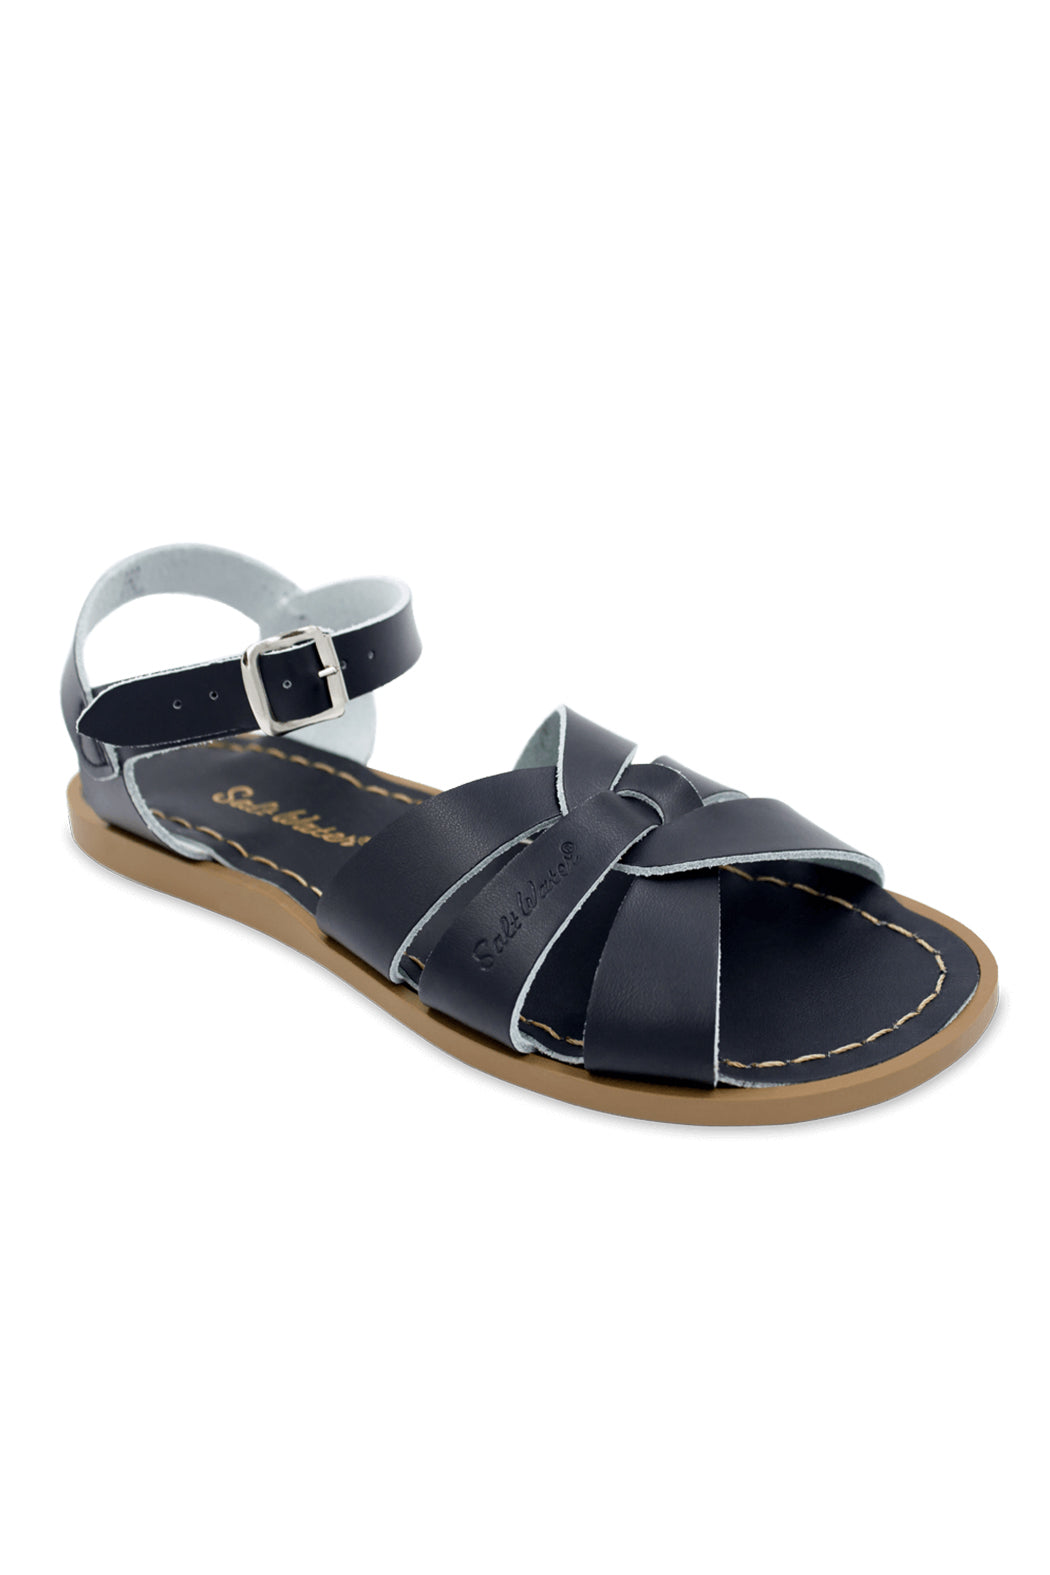 Hoy Shoes Salt Water Sandals Youth/Adult